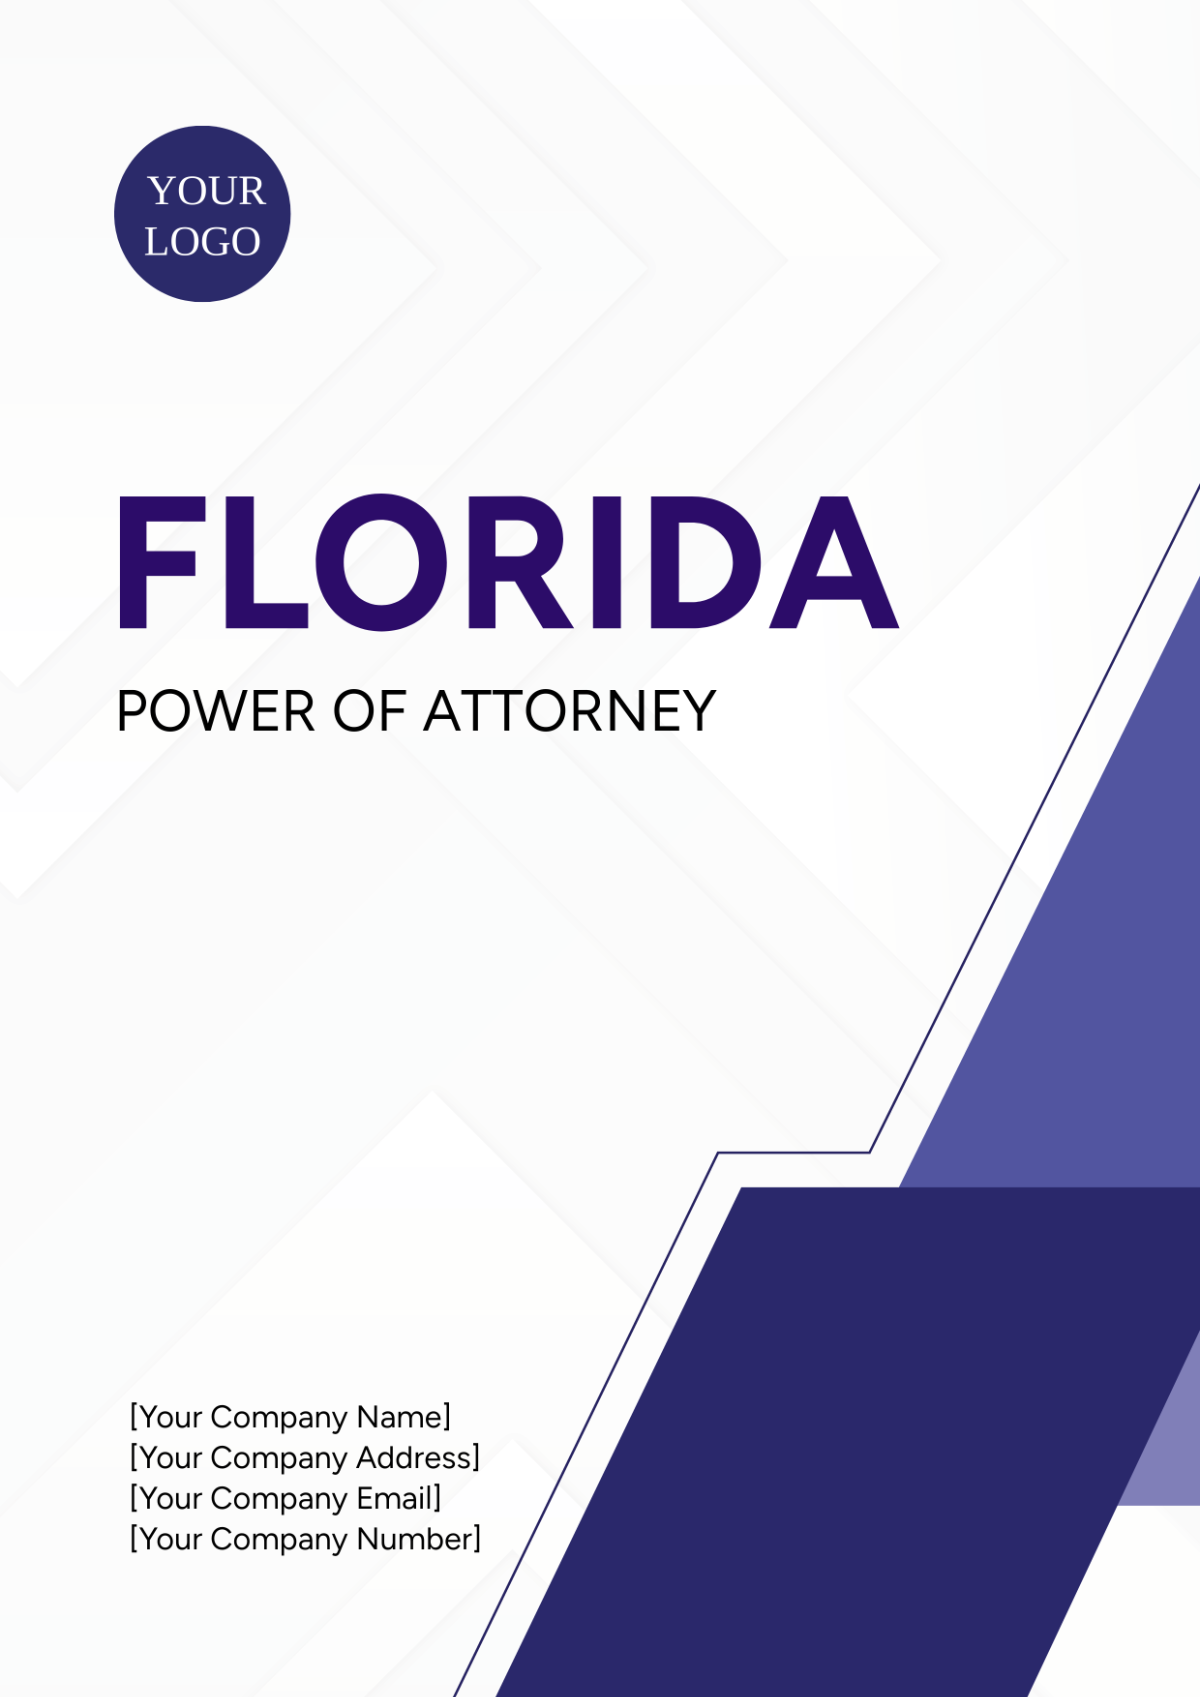 Florida Power of Attorney Cover Page